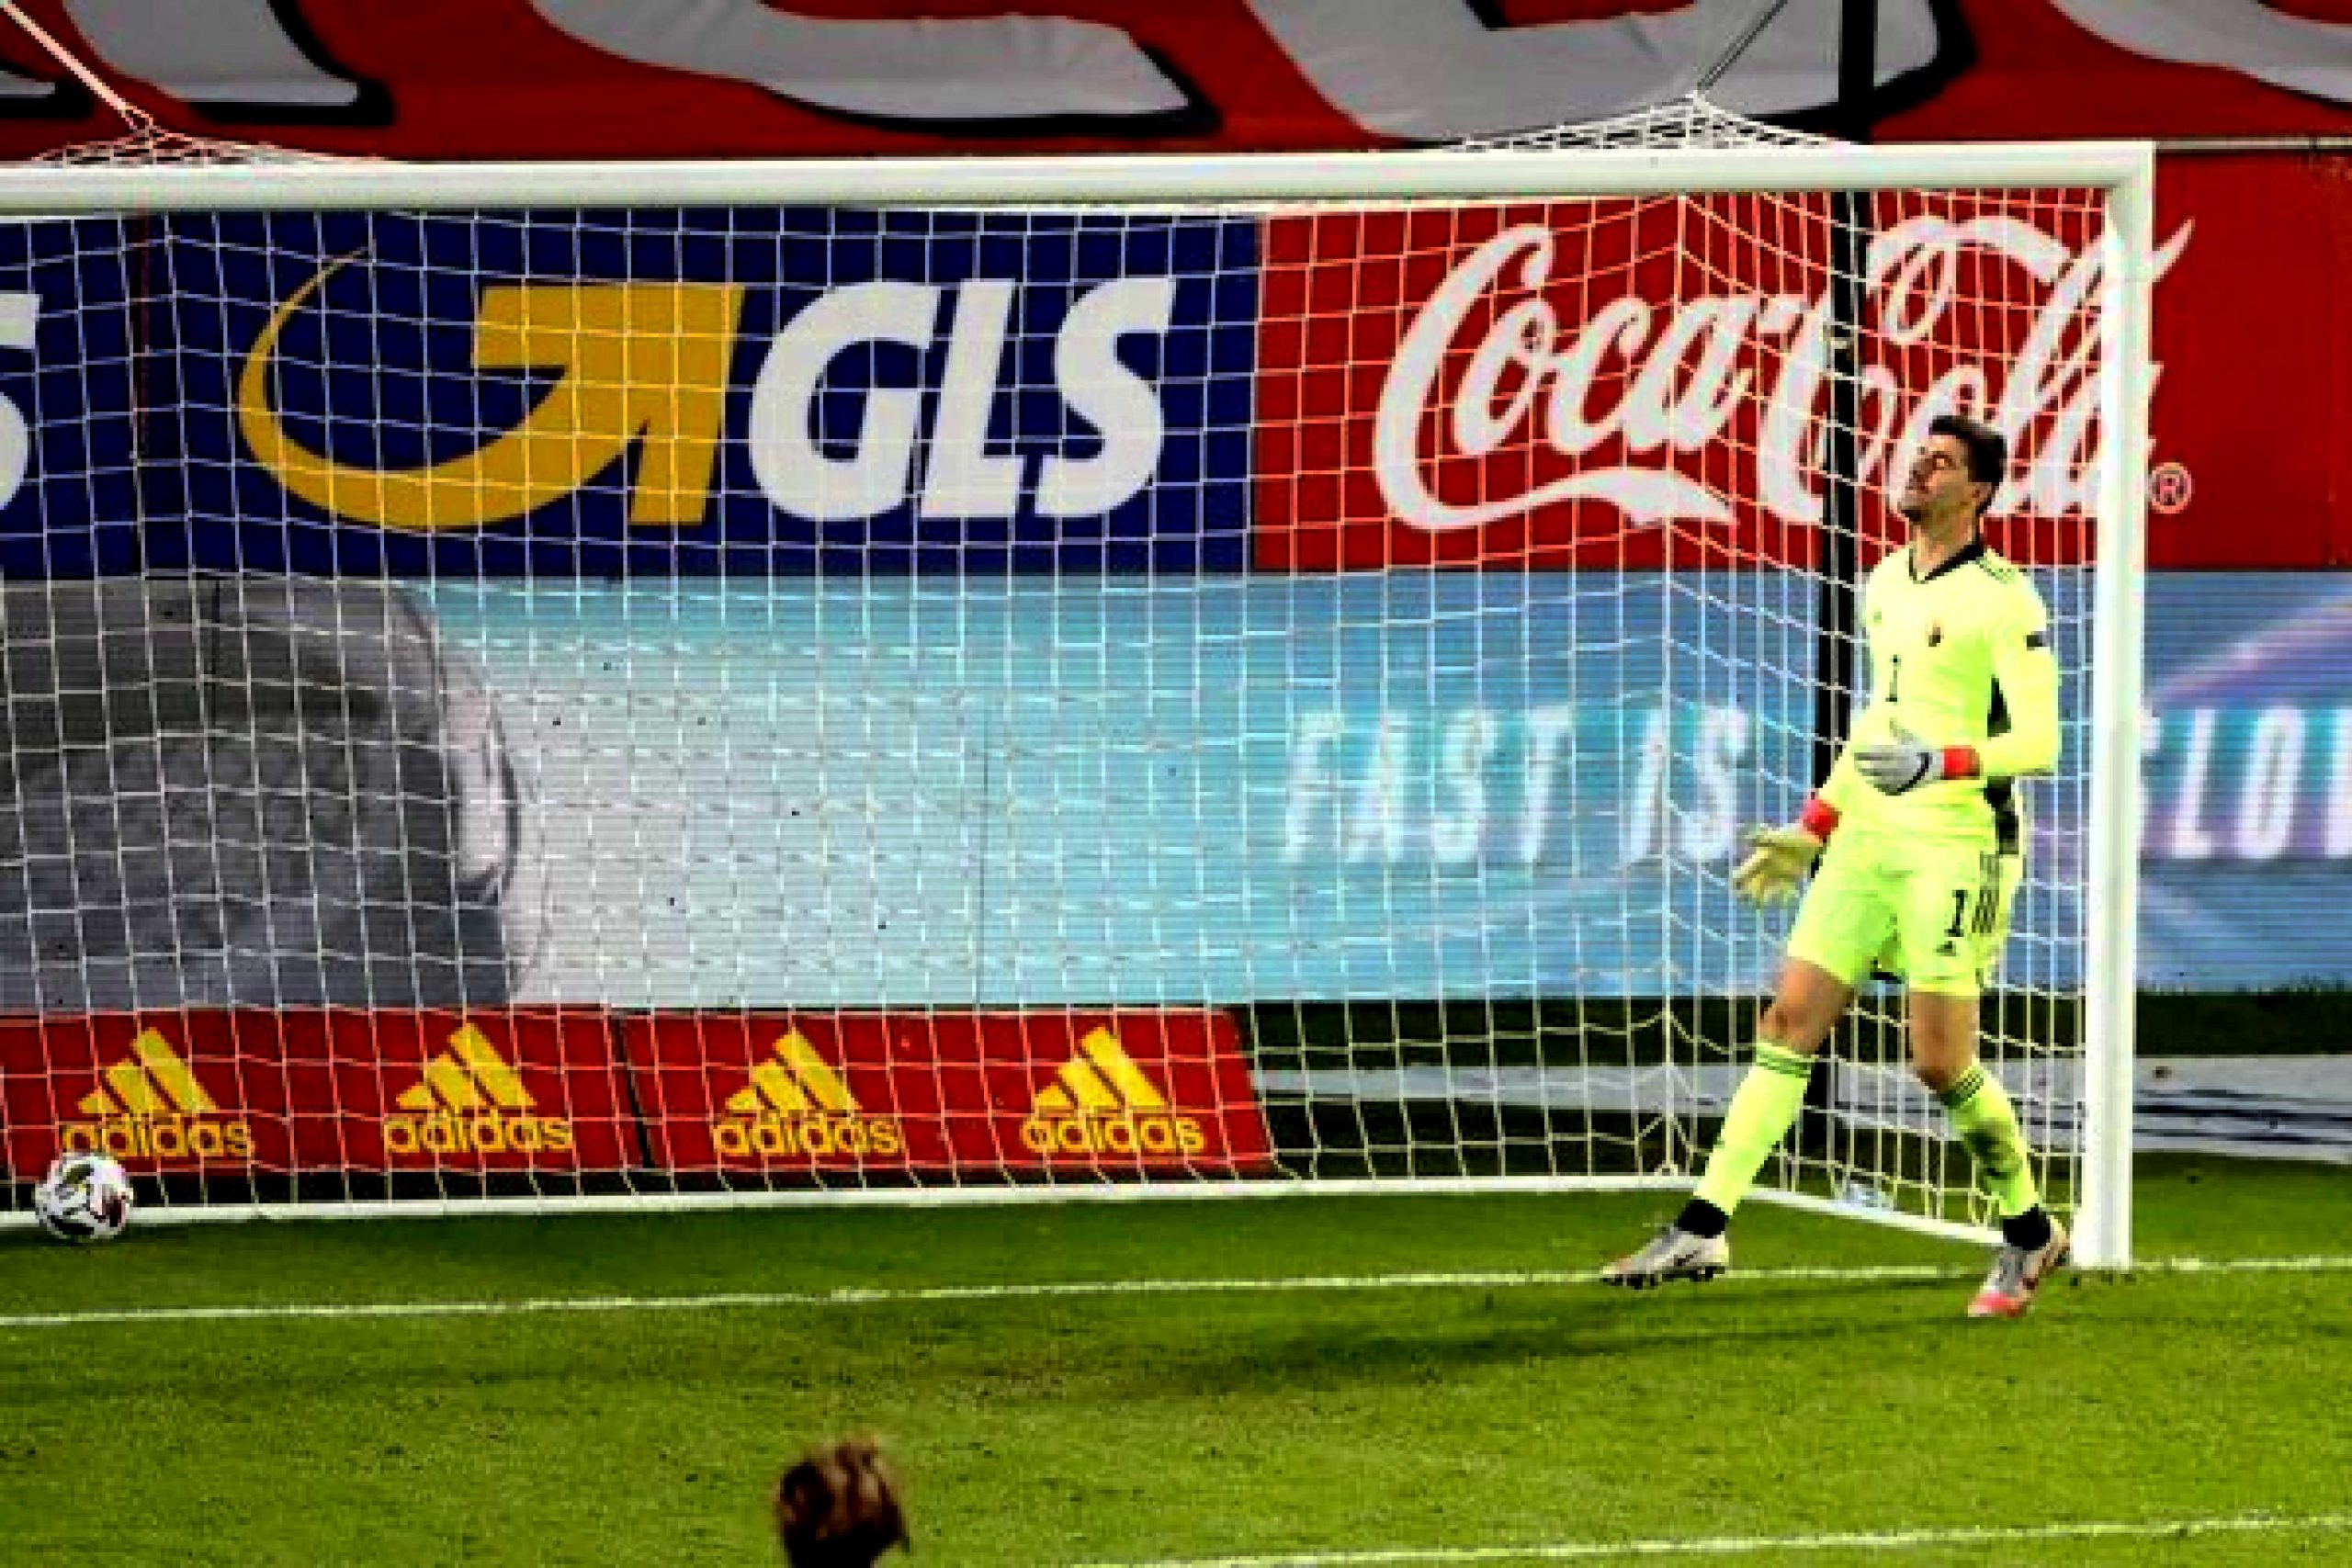 Belgium concede comical own goal after Thibaut Courtois botches a back pass against Denmark